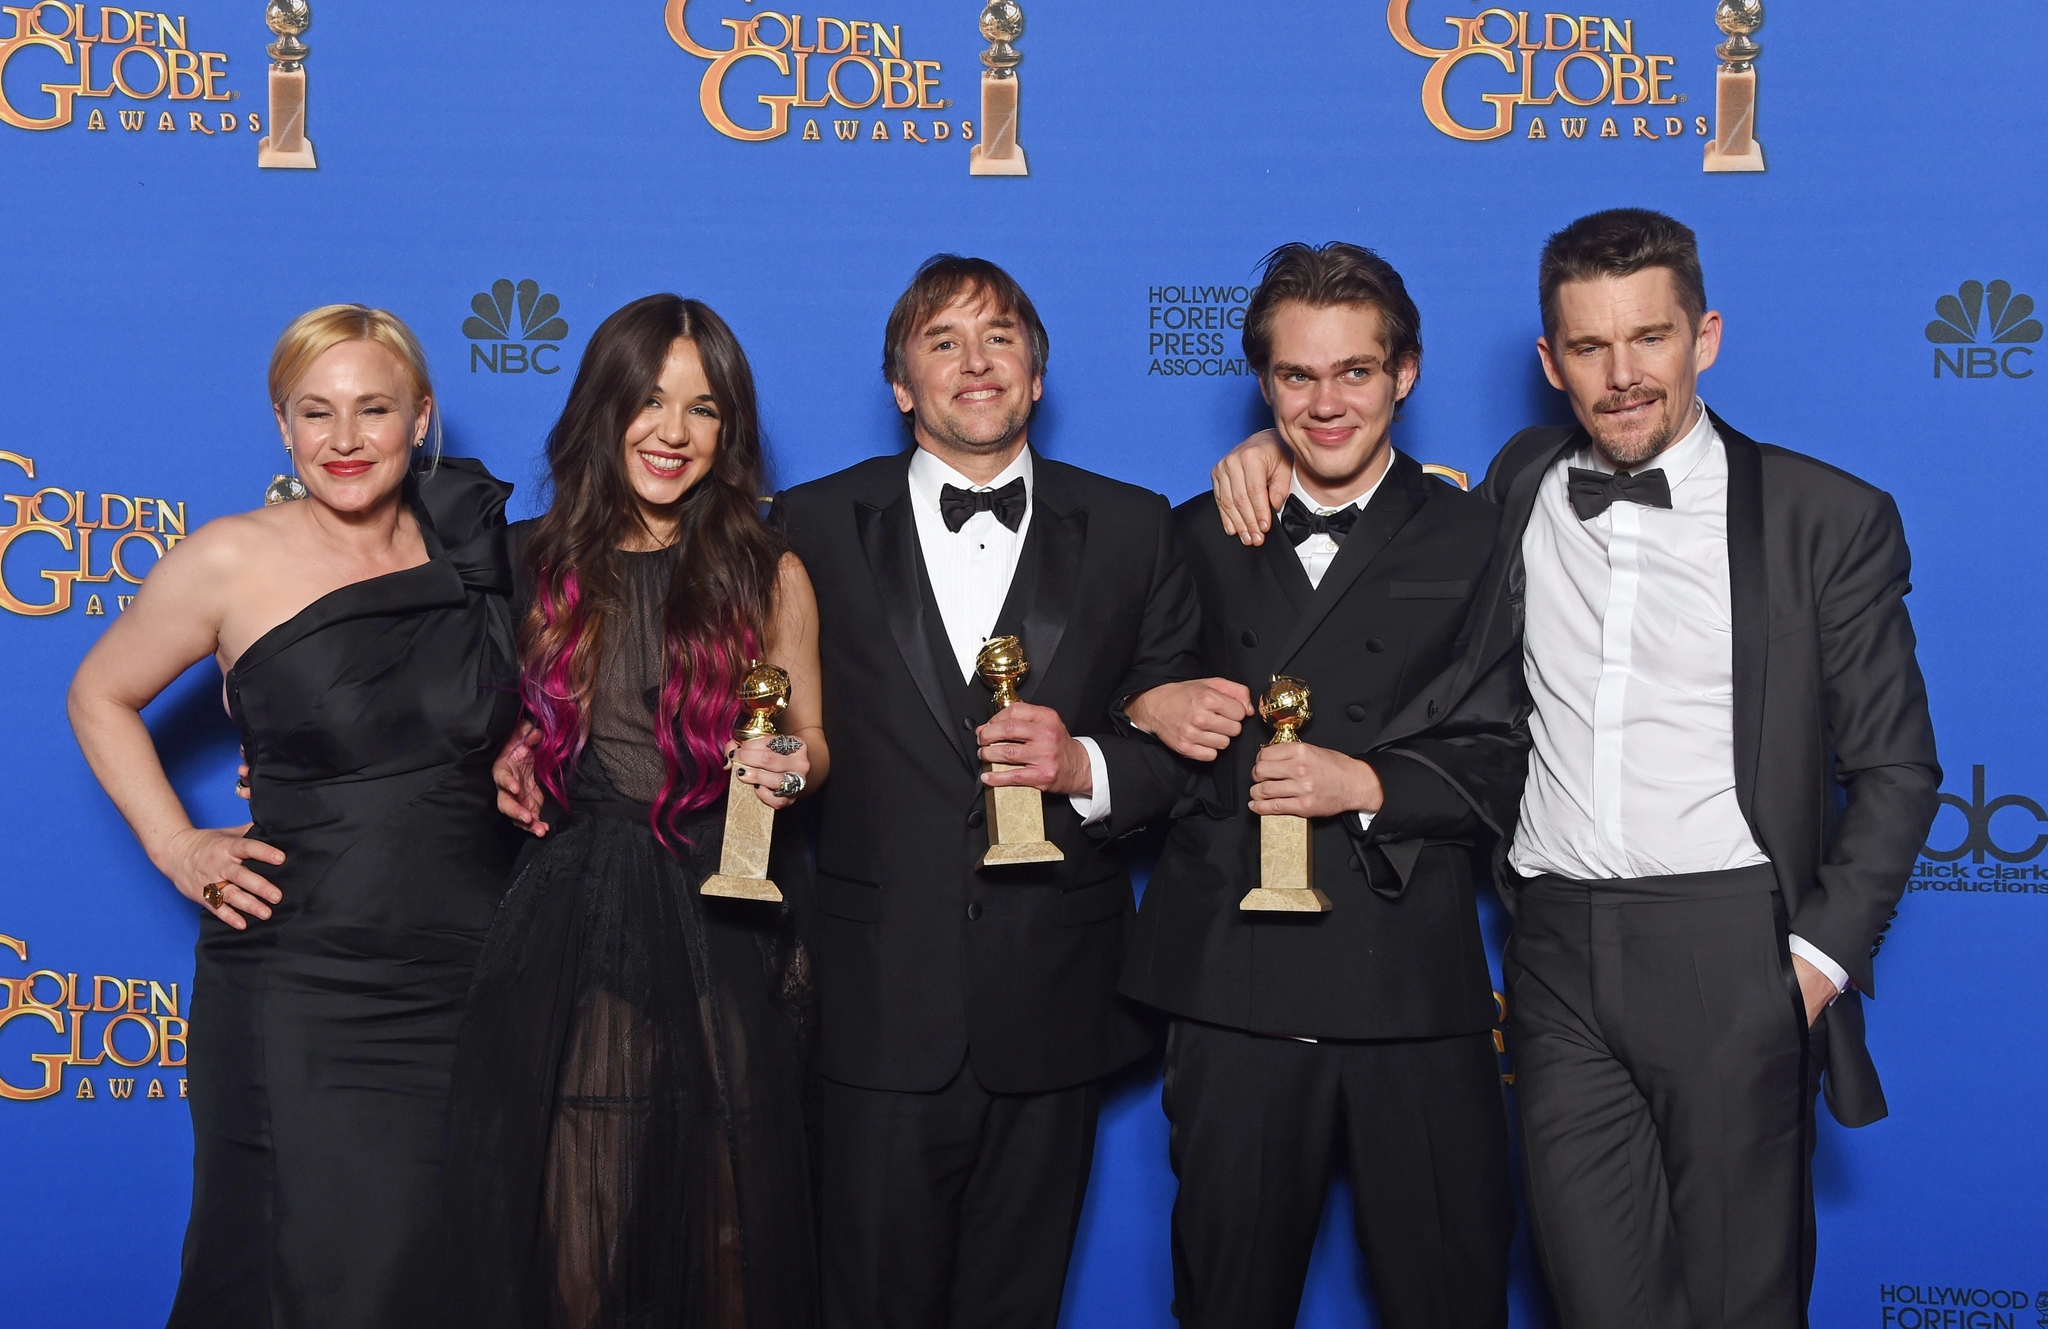 Patricia Arquette, Ethan Hawke, Richard Linklater, Lorelei Linklater and Ellar Coltrane at event of 72nd Golden Globe Awards (2015)